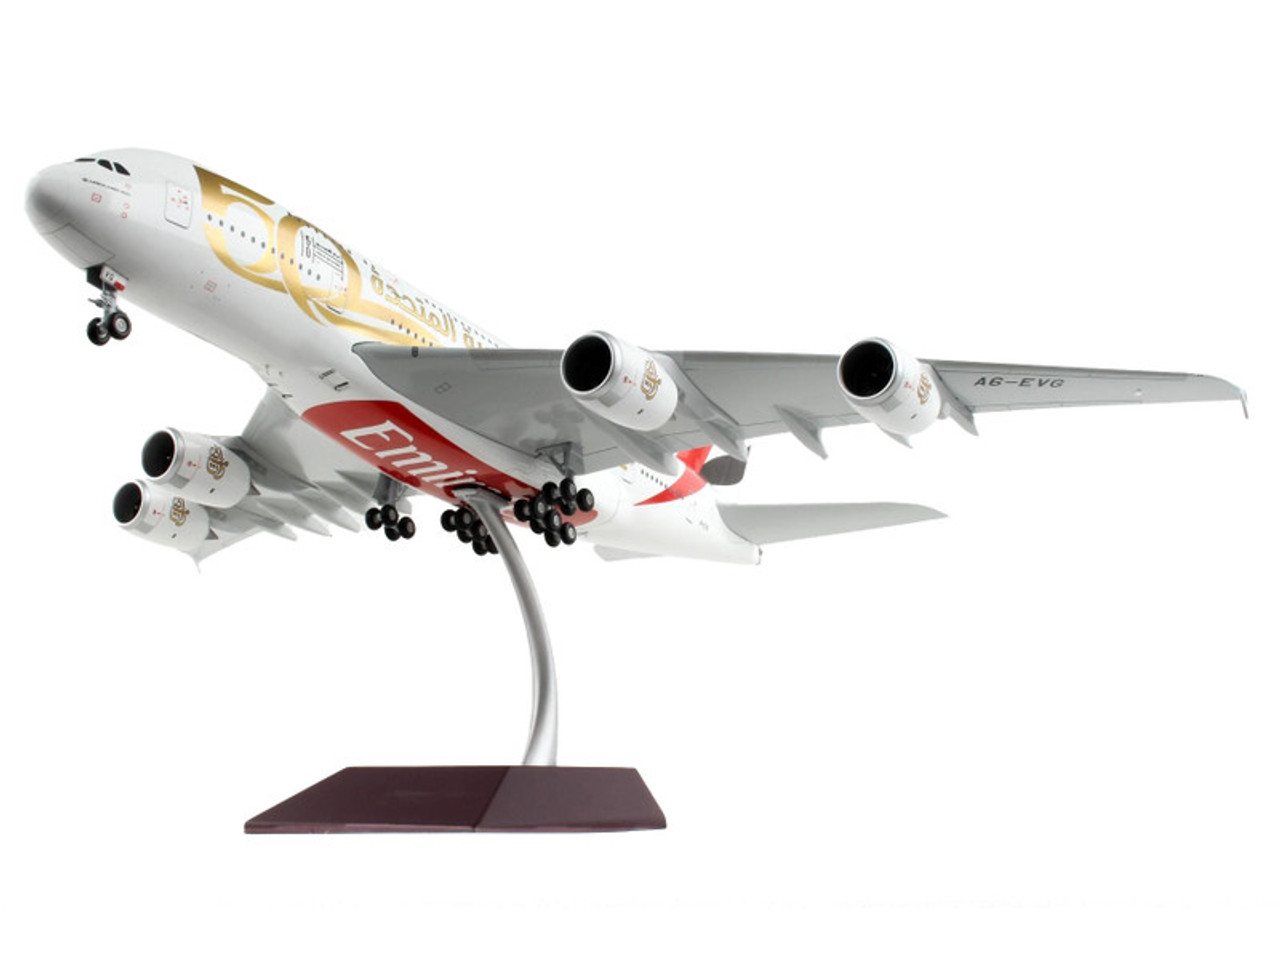 Airbus A380-800 Commercial Aircraft "Emirates Airlines - 50th Anniversary of UAE" White with Striped Tail "Gemini 200" Series 1/200 Diecast Model Airplane by GeminiJets